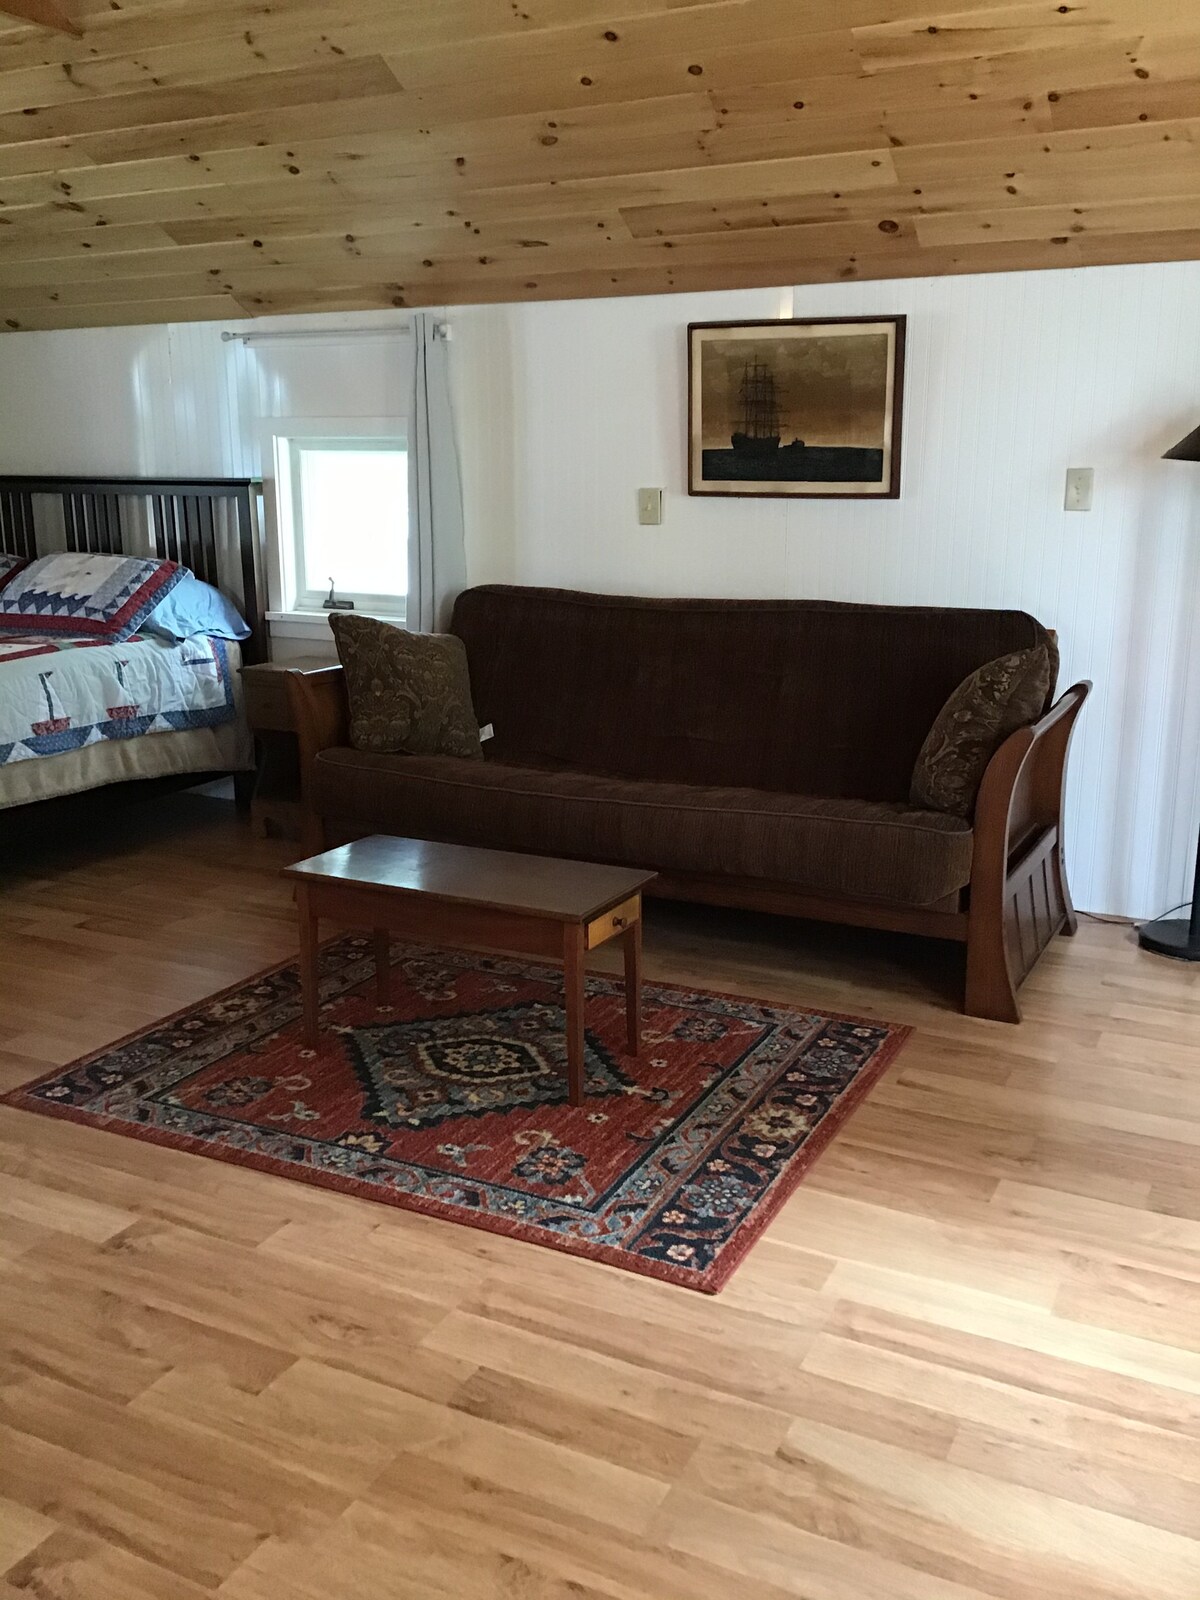 Lakefront entire private guest suite Henderson NY